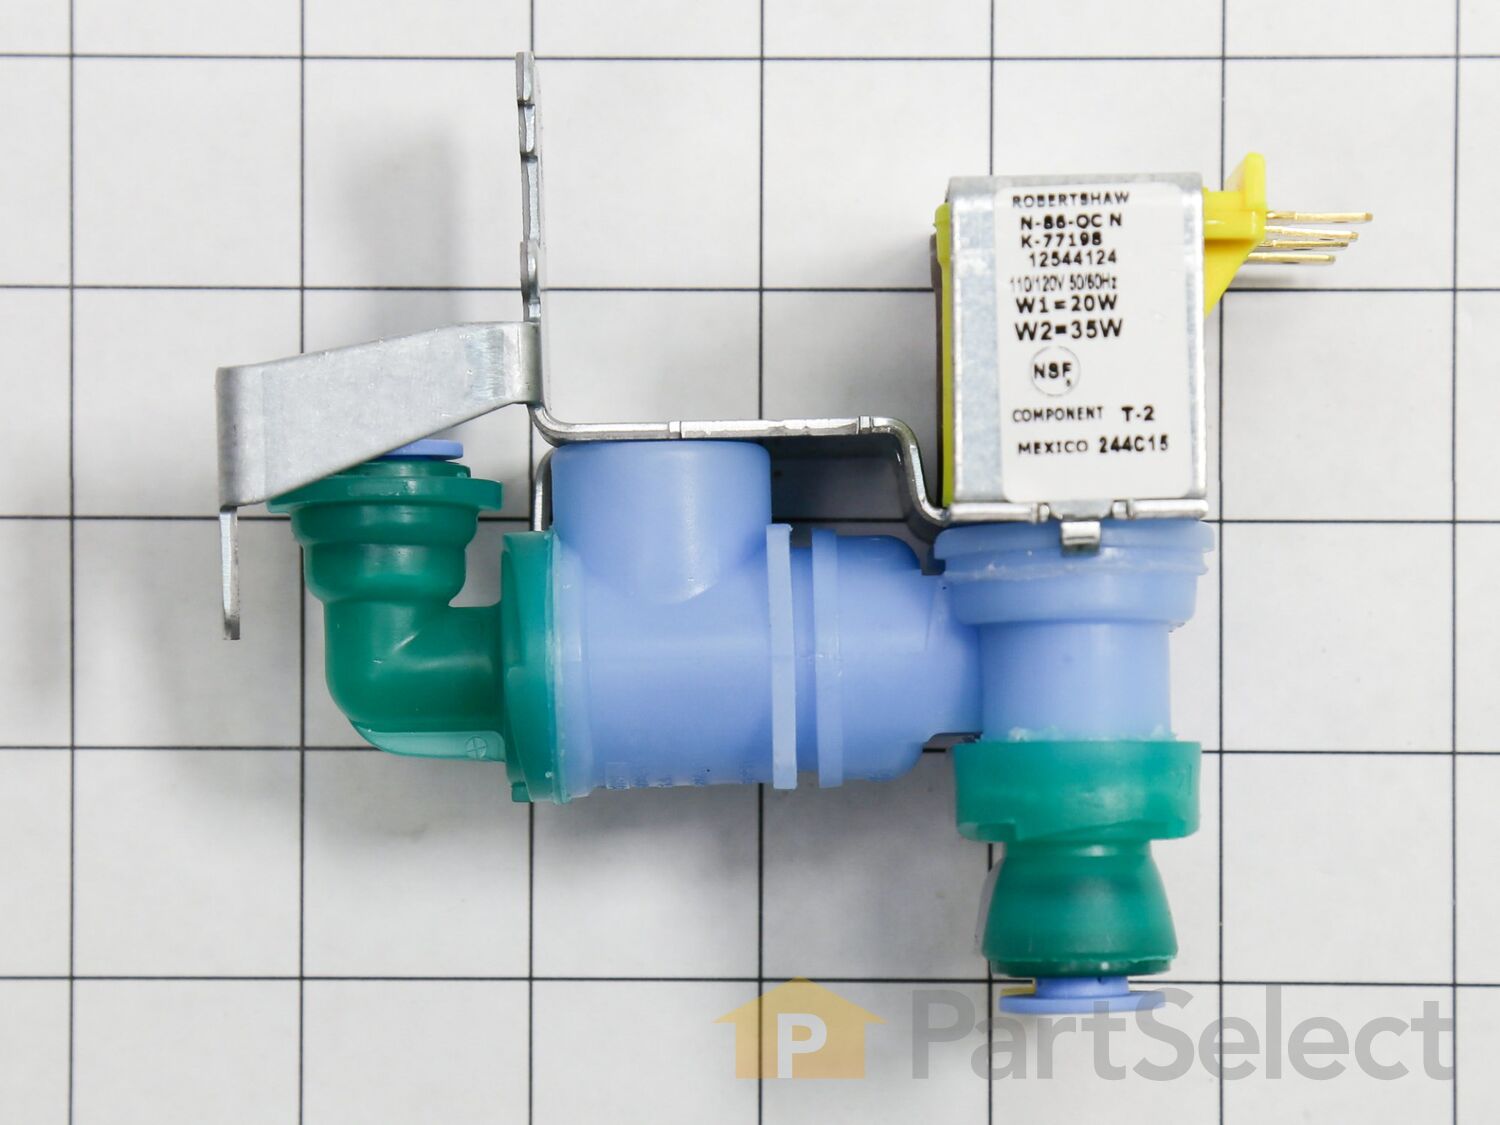 Refrigerator Water Ice Valve For Kenmore Whirlpool  WP12544124 12544124 K-77198 